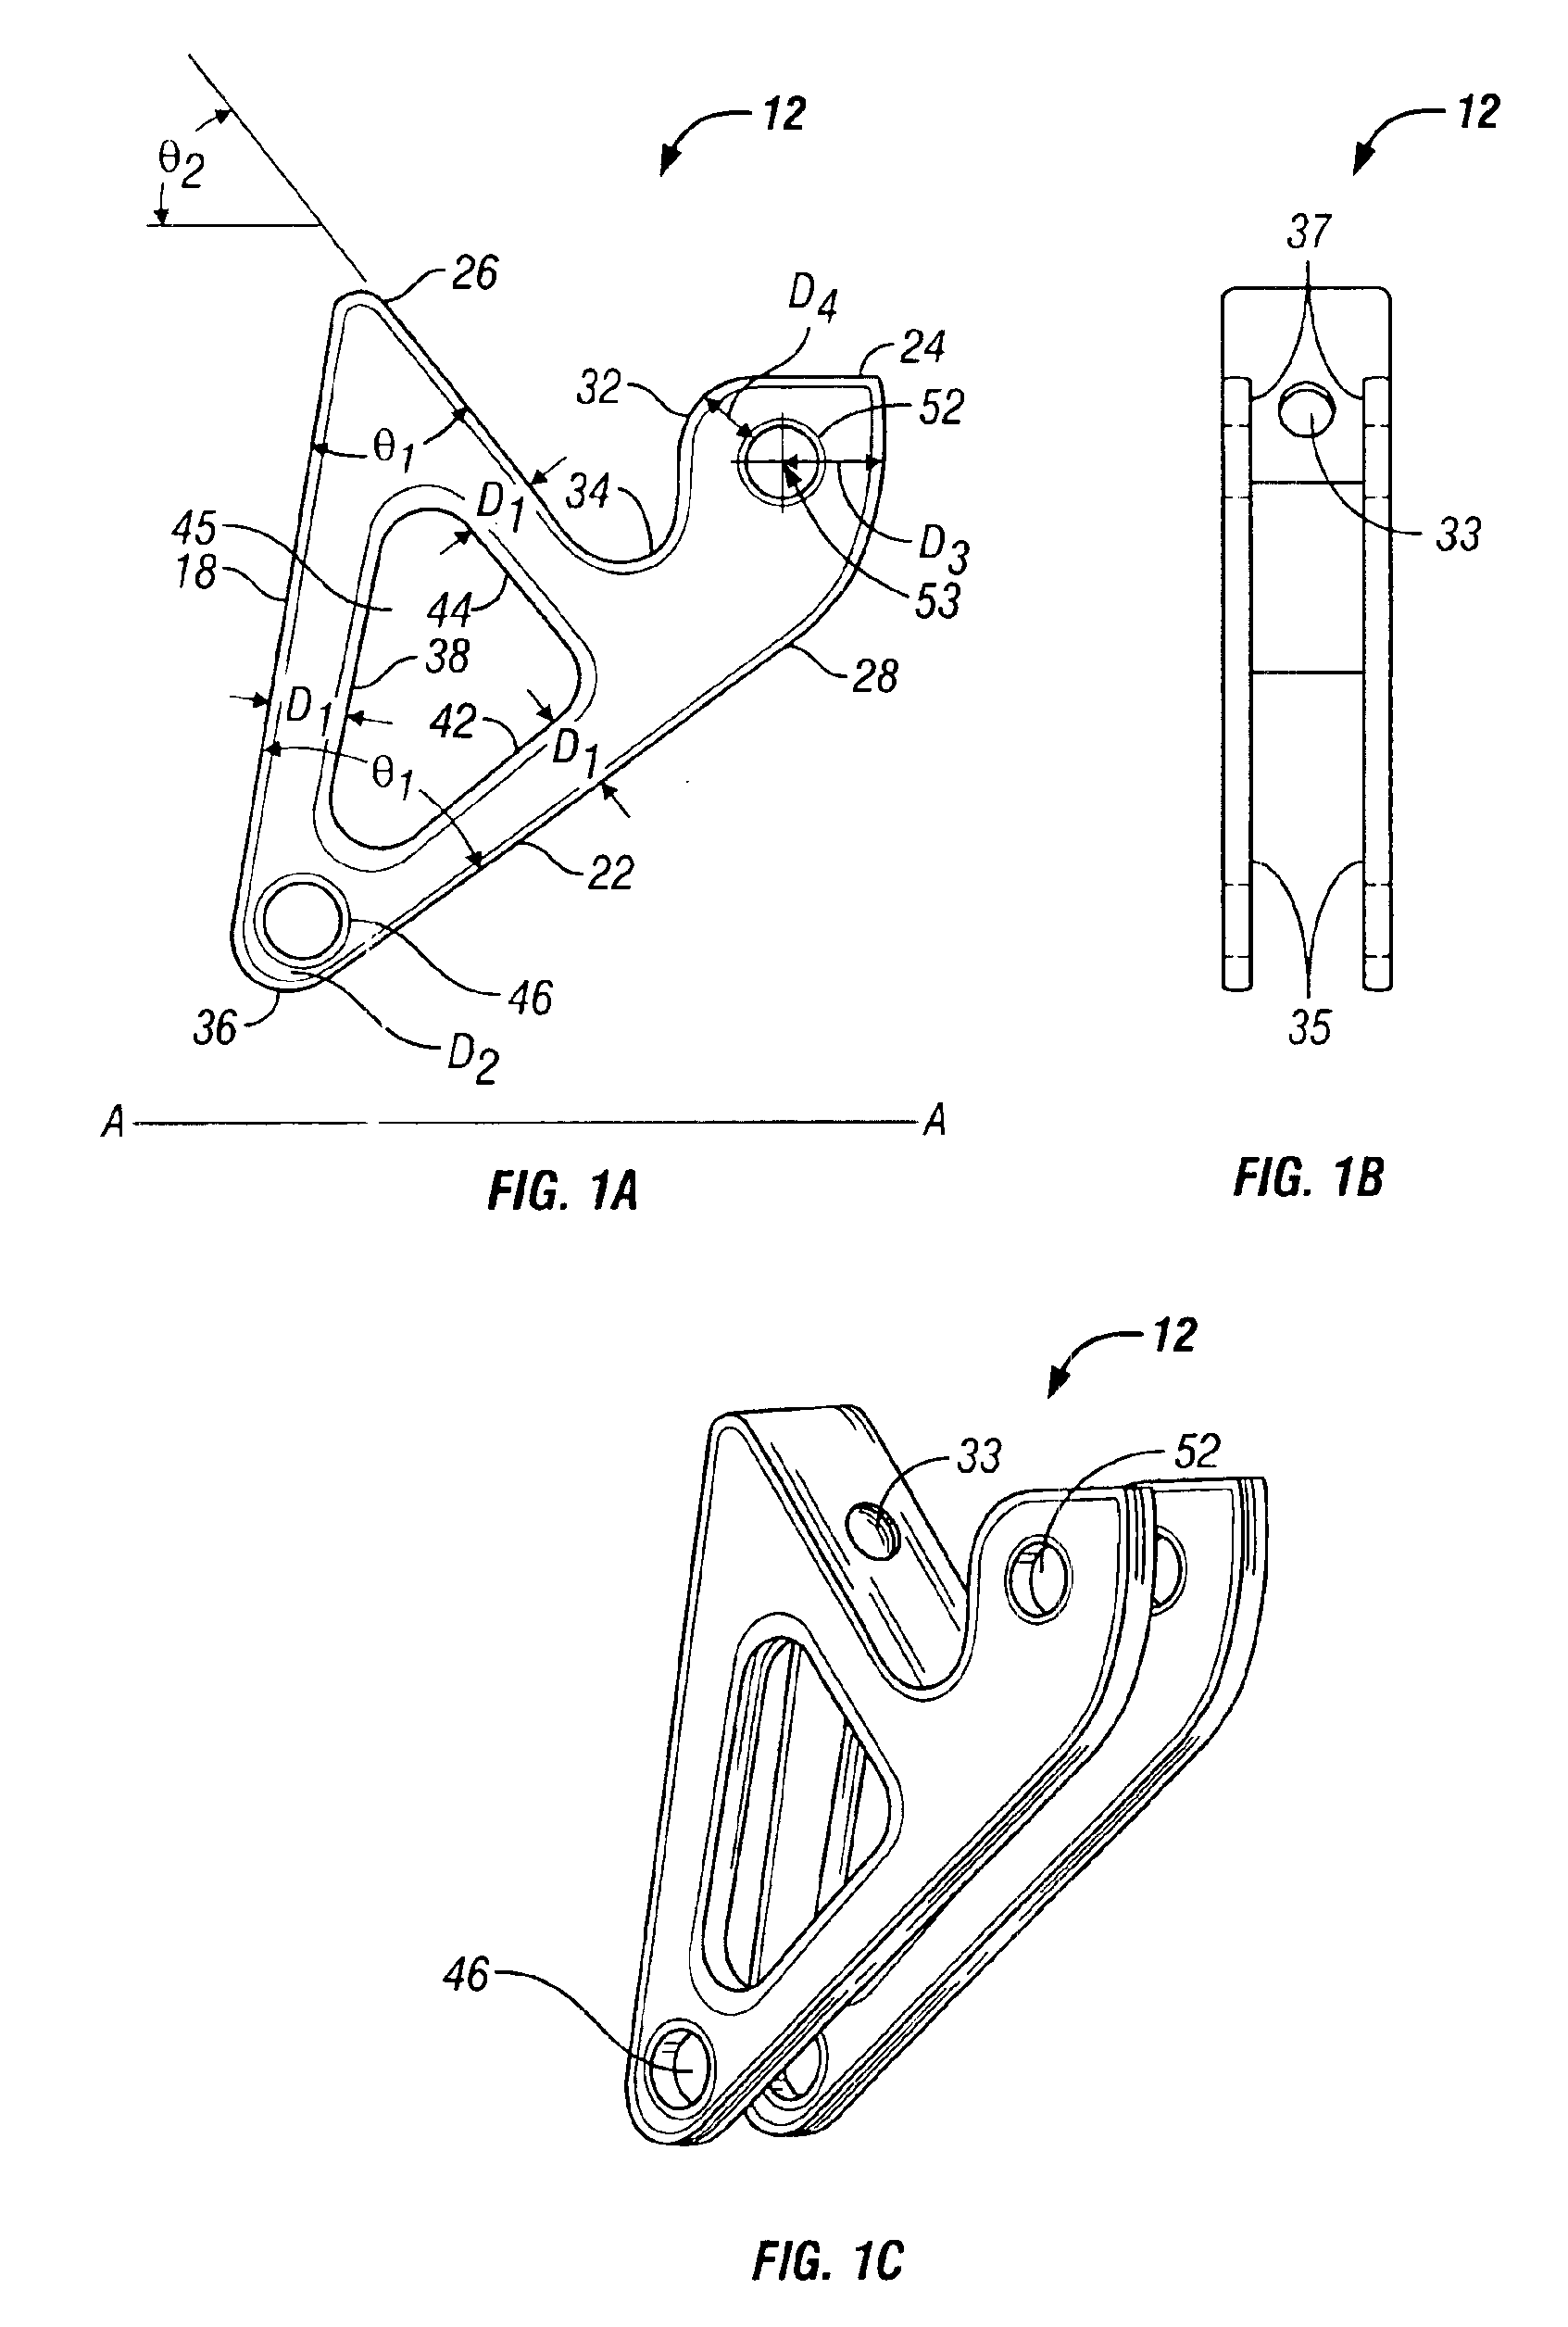 Oblique angled suspension caster fork for wheelchairs